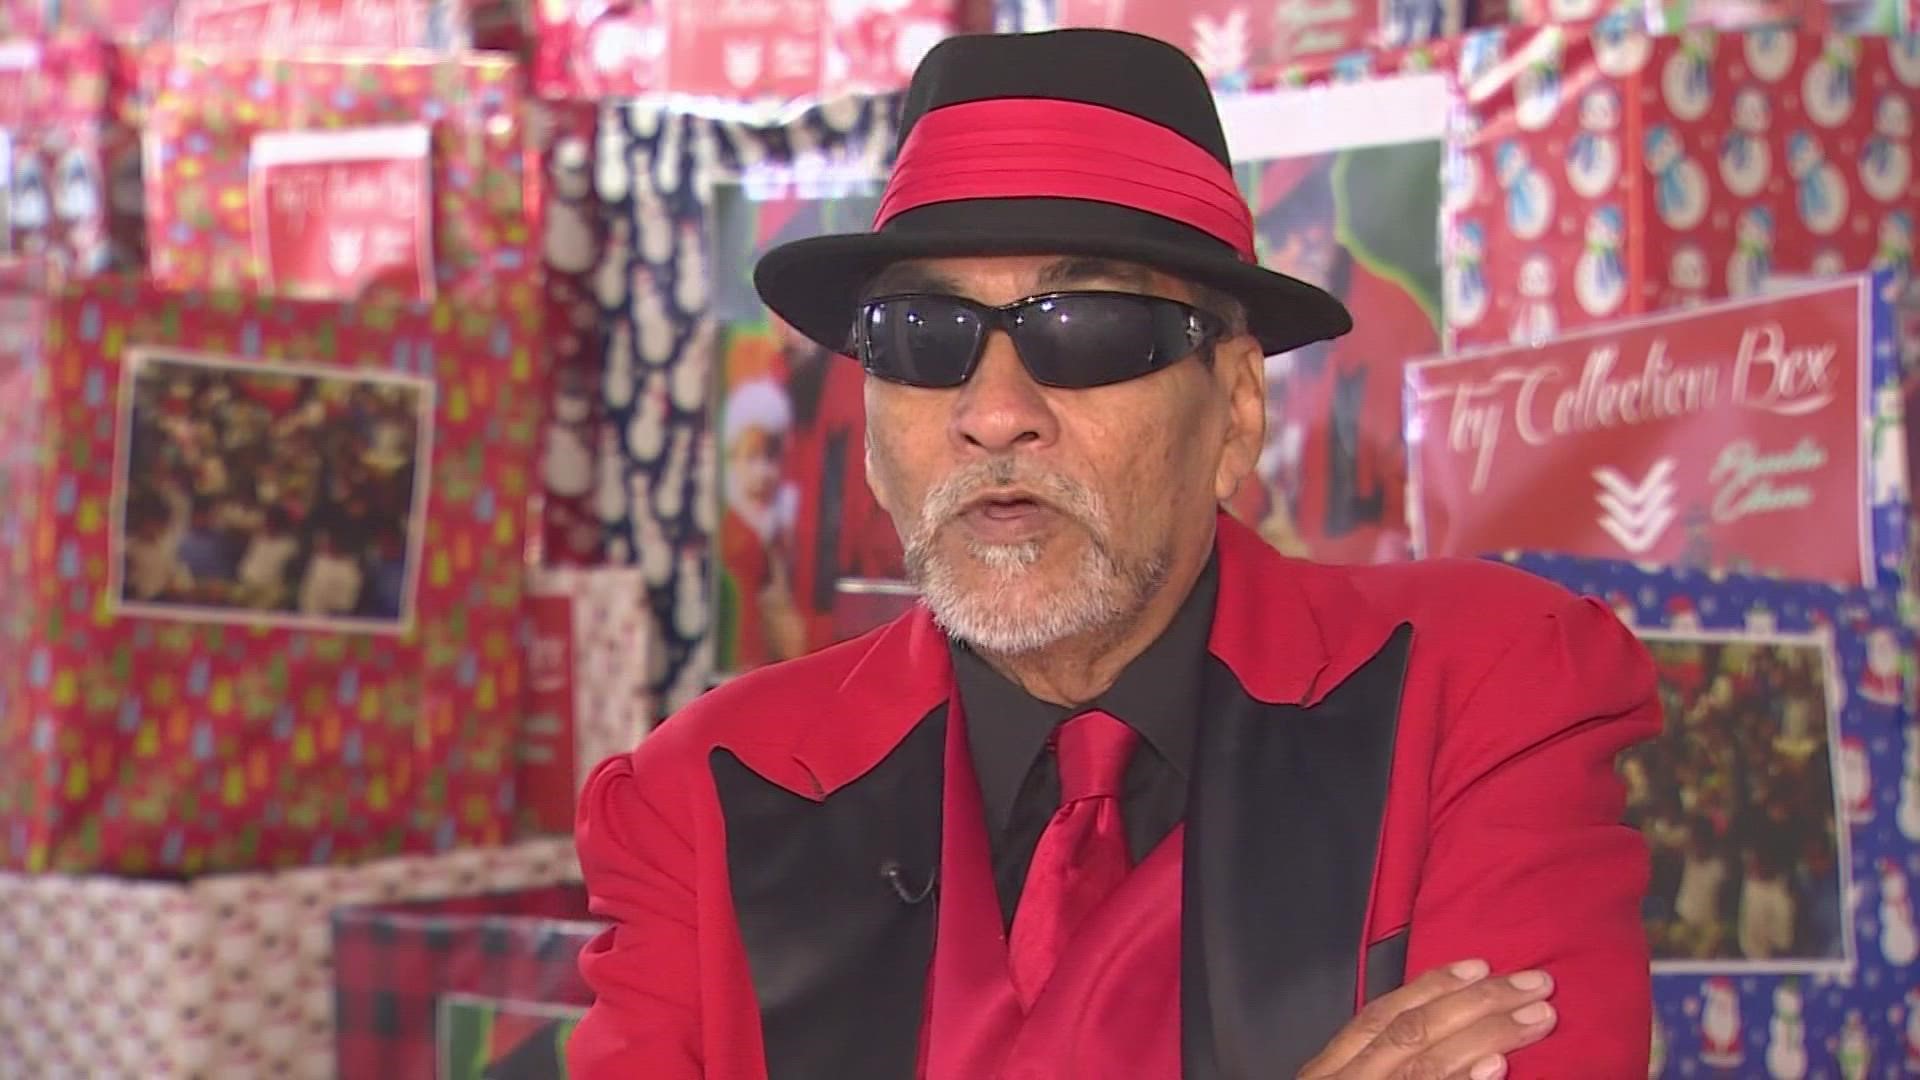 Richard Reyes, AKA Pancho Claus, said he's adding parts of the Rio Grande Valley to his Christmas giveaway that has become a tradition in Houston.